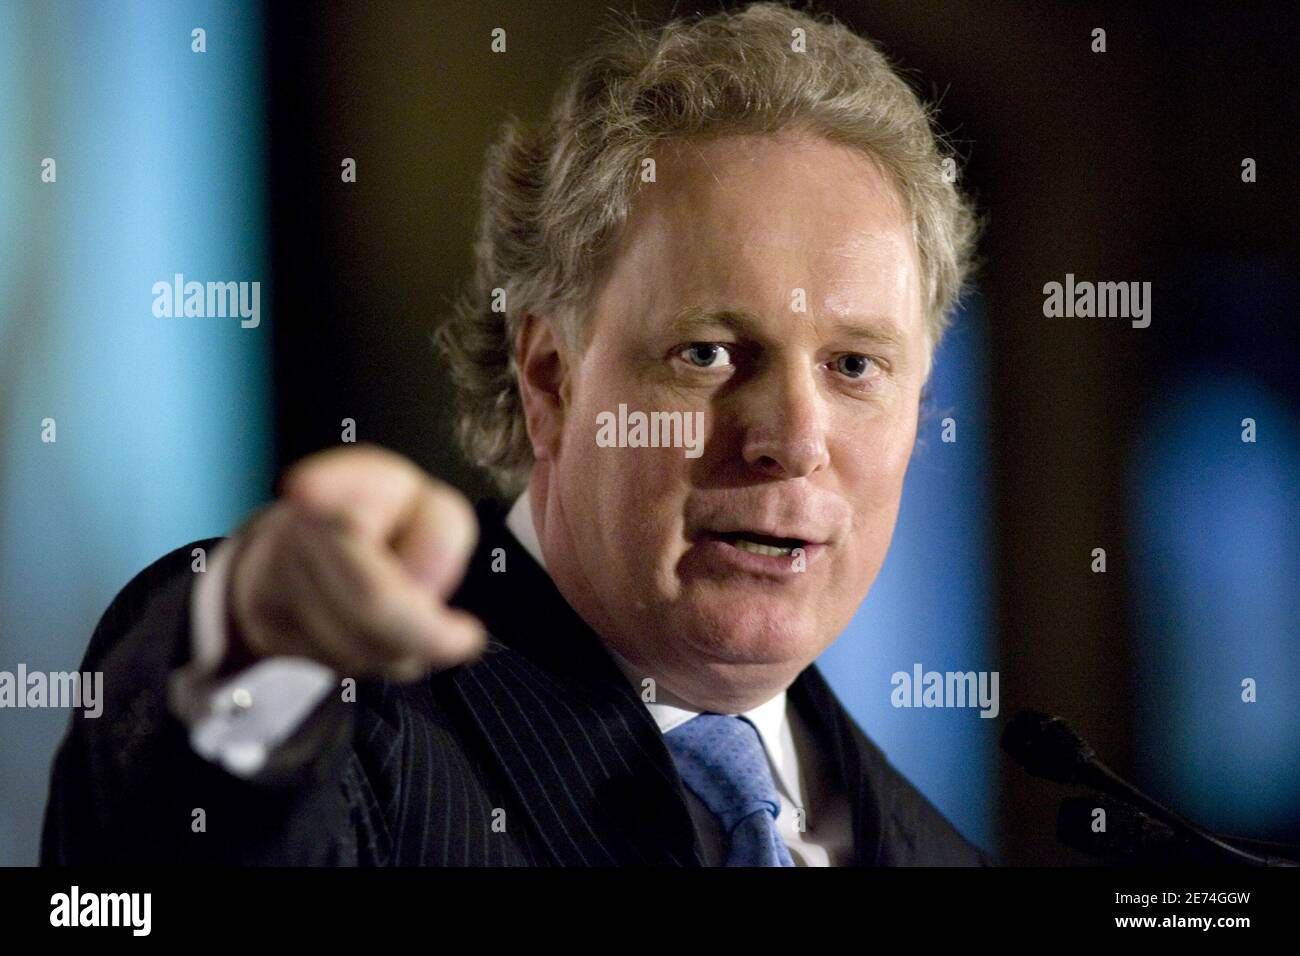 Quebec Premier and leader of the Liberal Party, Jean Charest, addresses members of the Montreal Chamber of Commerce in Montreal, Canada on March 20, 2007. Quebec voters will decide 26 March on either a federalist government or Quebec separatists trying to break up Canada. Photo by Normand Blouin/ABACAPRESS.COM Stock Photo